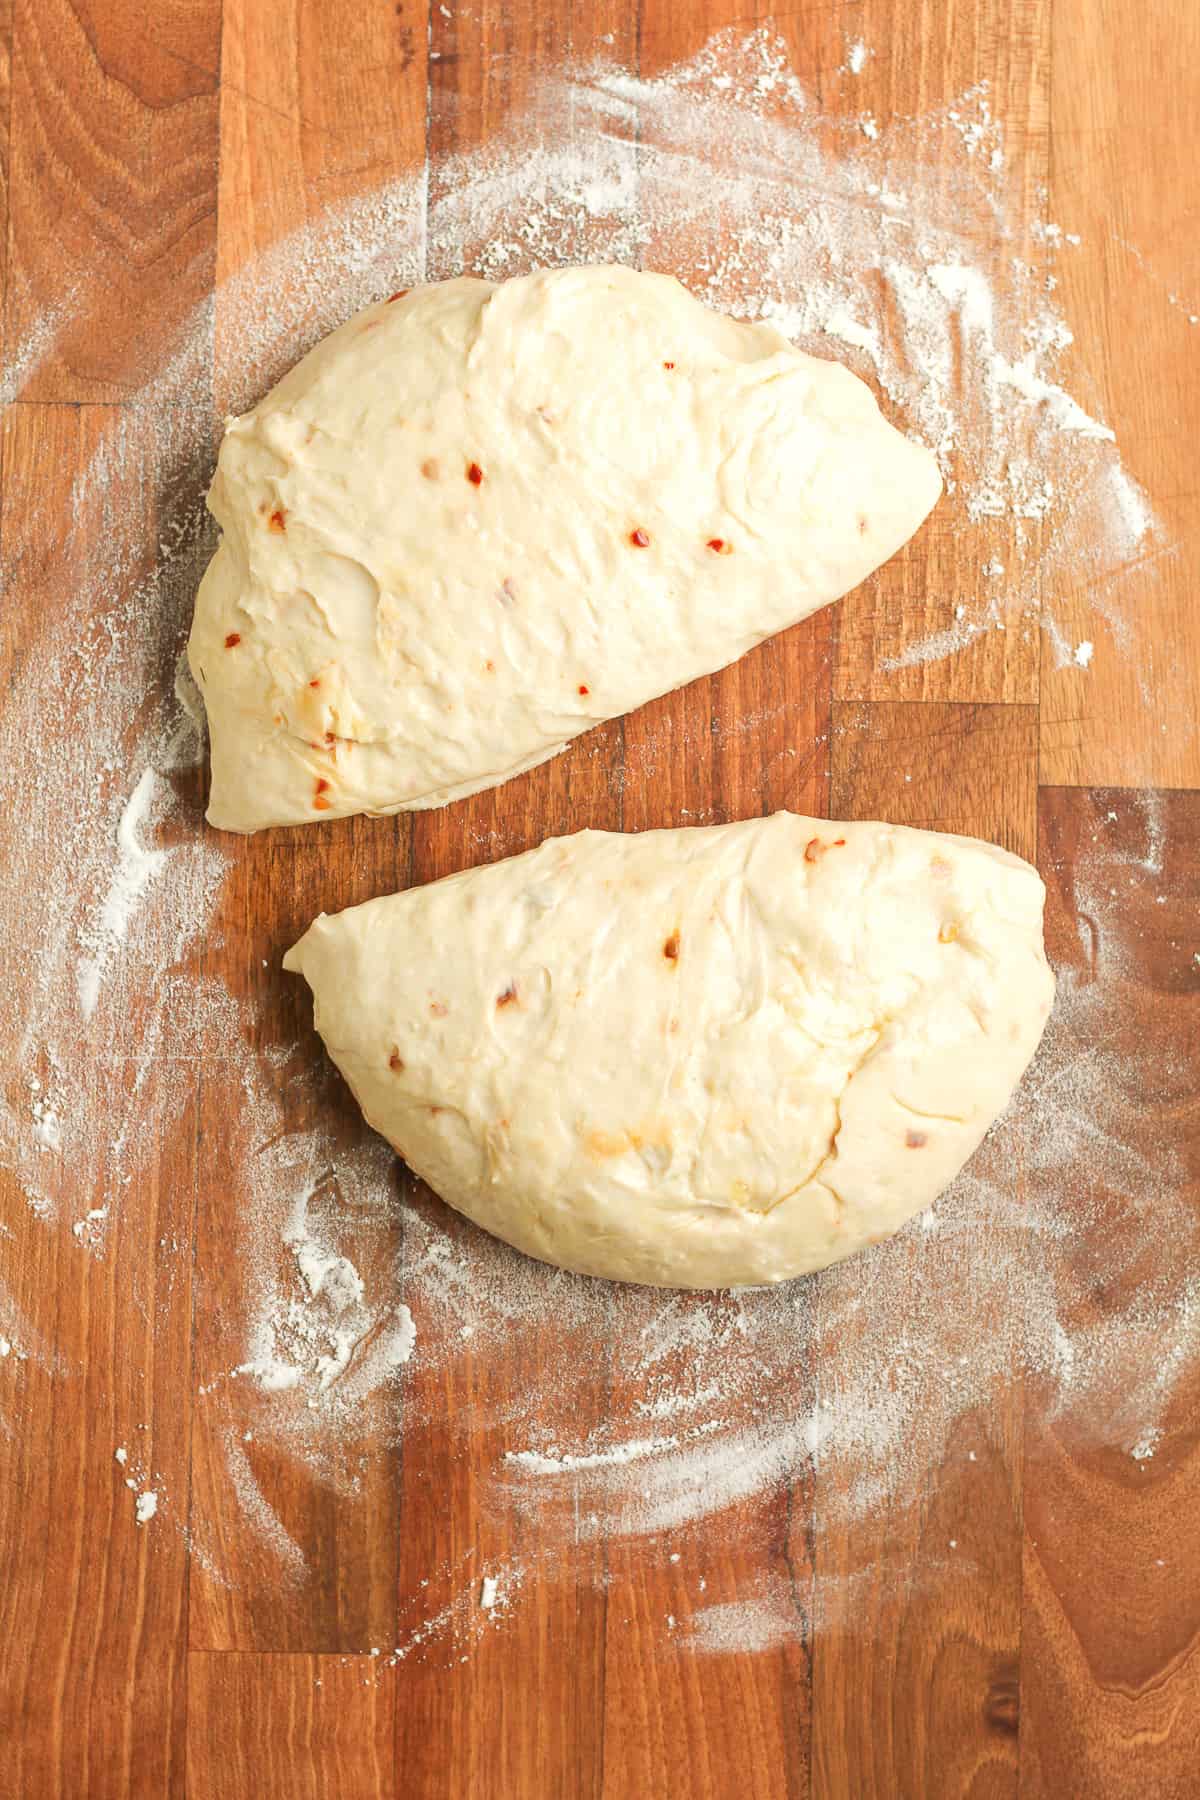 A round of dough cut in half for pizza making.